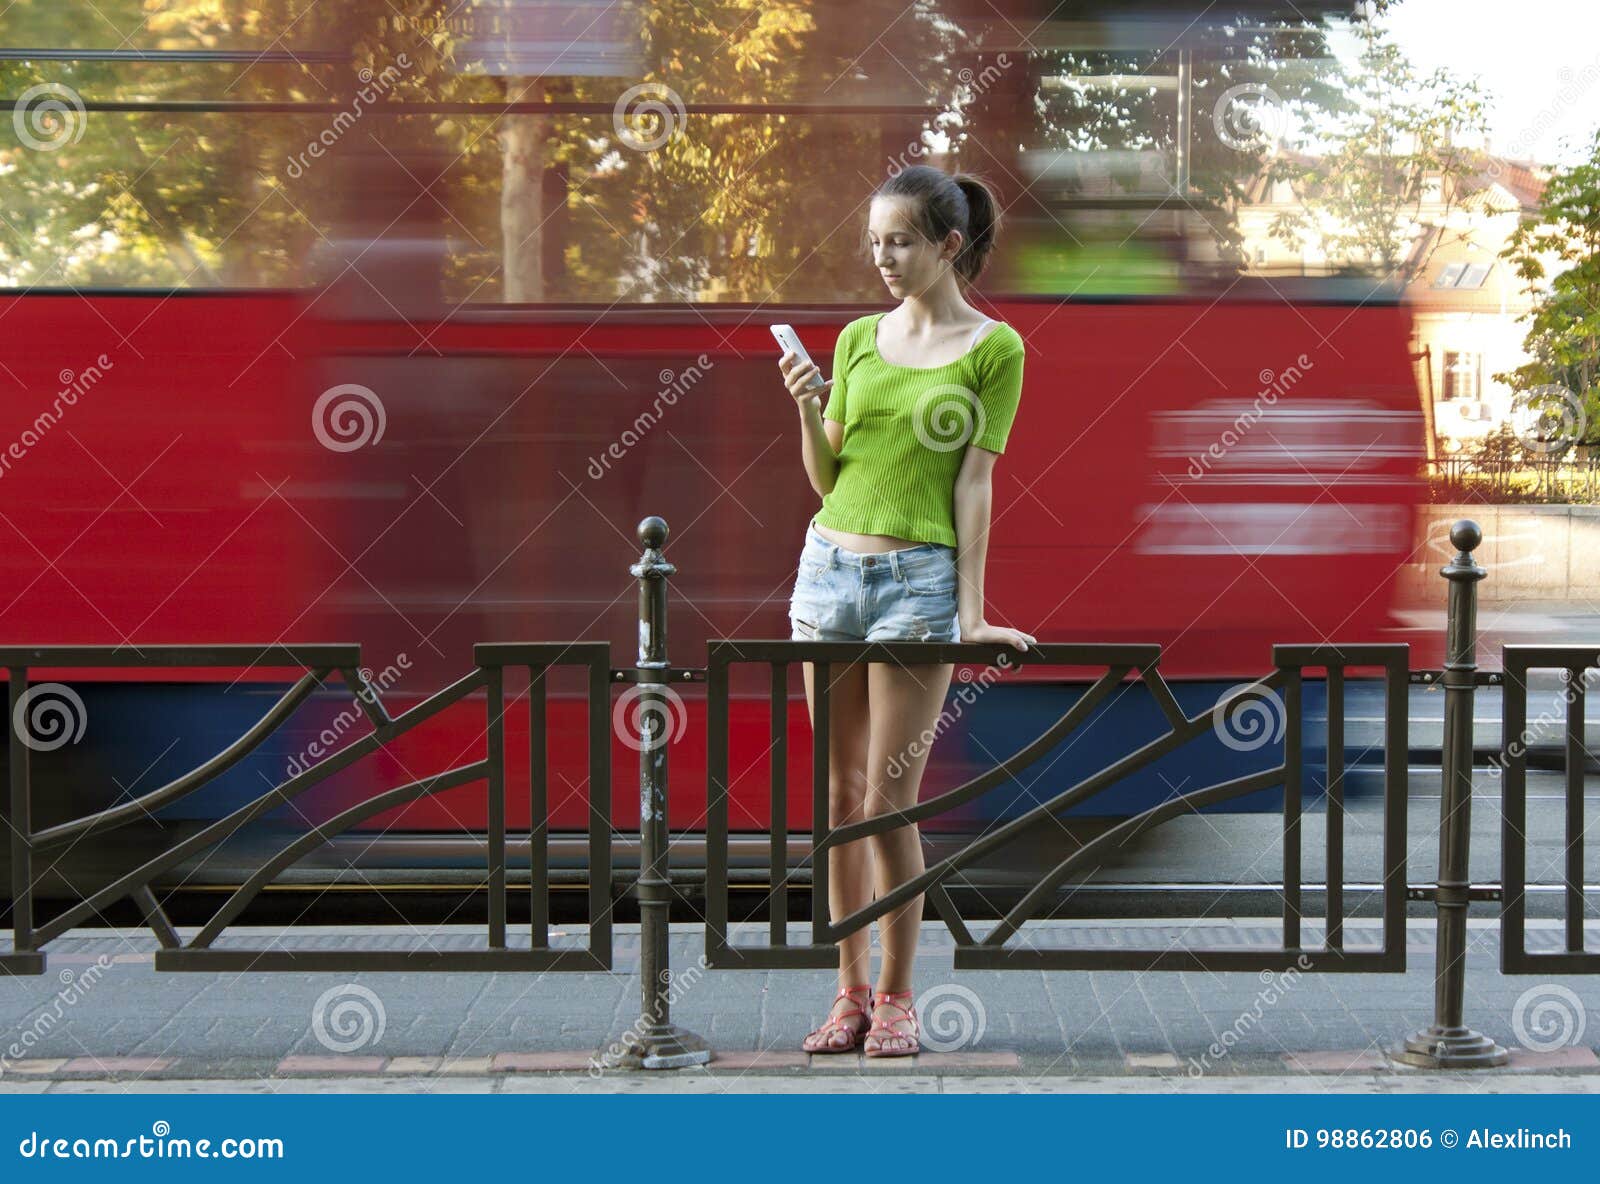 girl on bus stop stock photo. Image of shorts 98862806